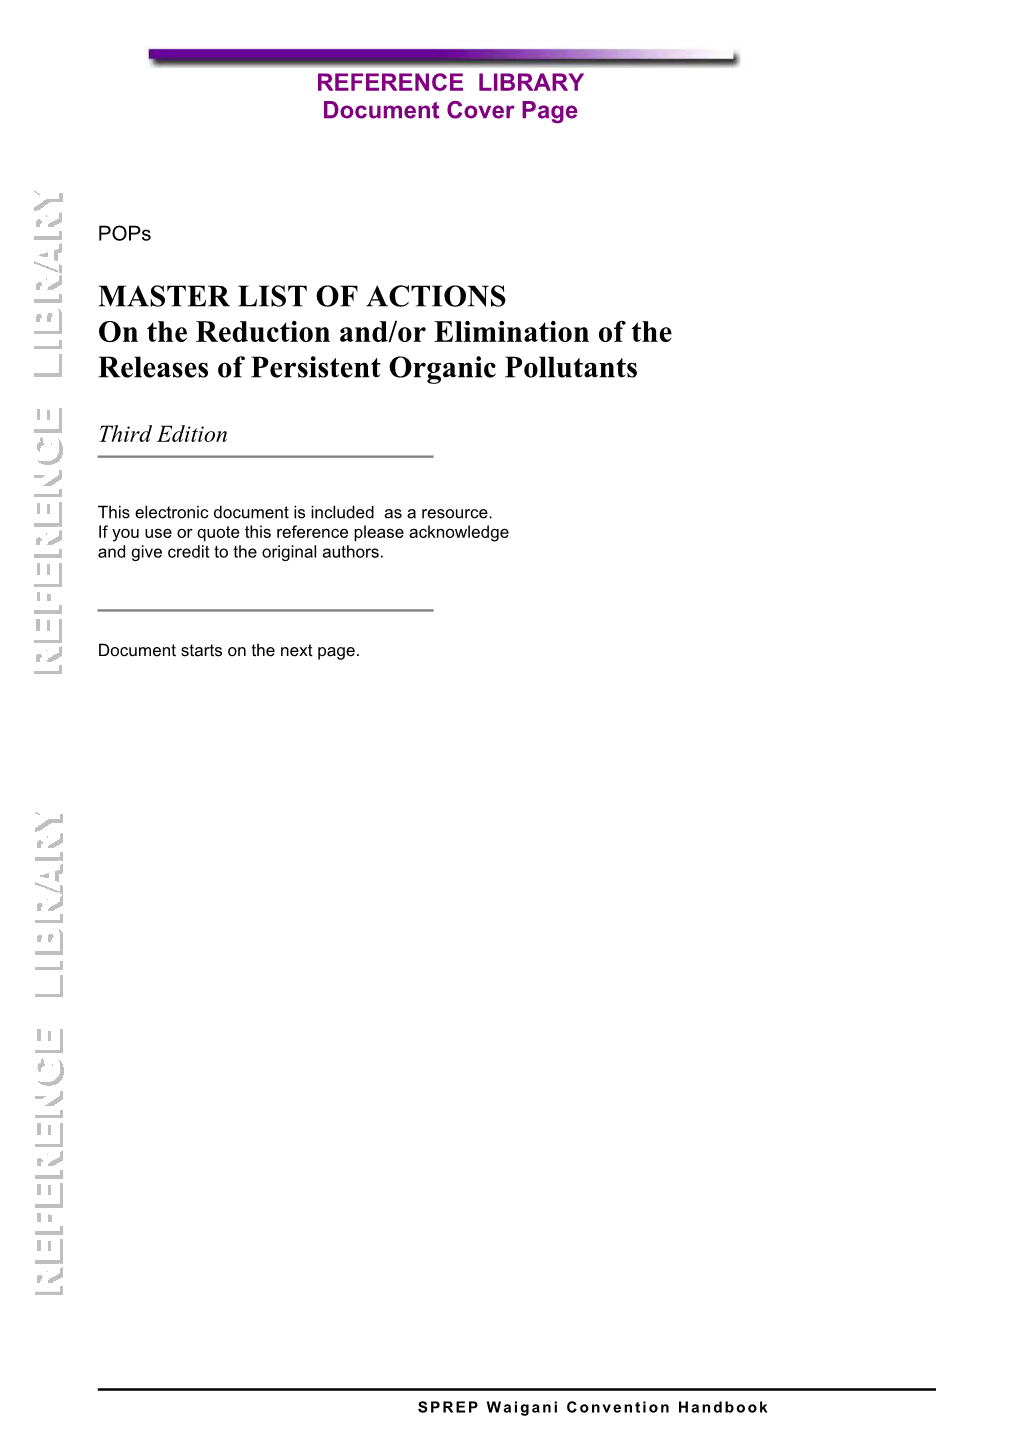 MASTER LIST of ACTIONS on the Reduction And/Or Elimination of the Releases of Persistent Organic Pollutants